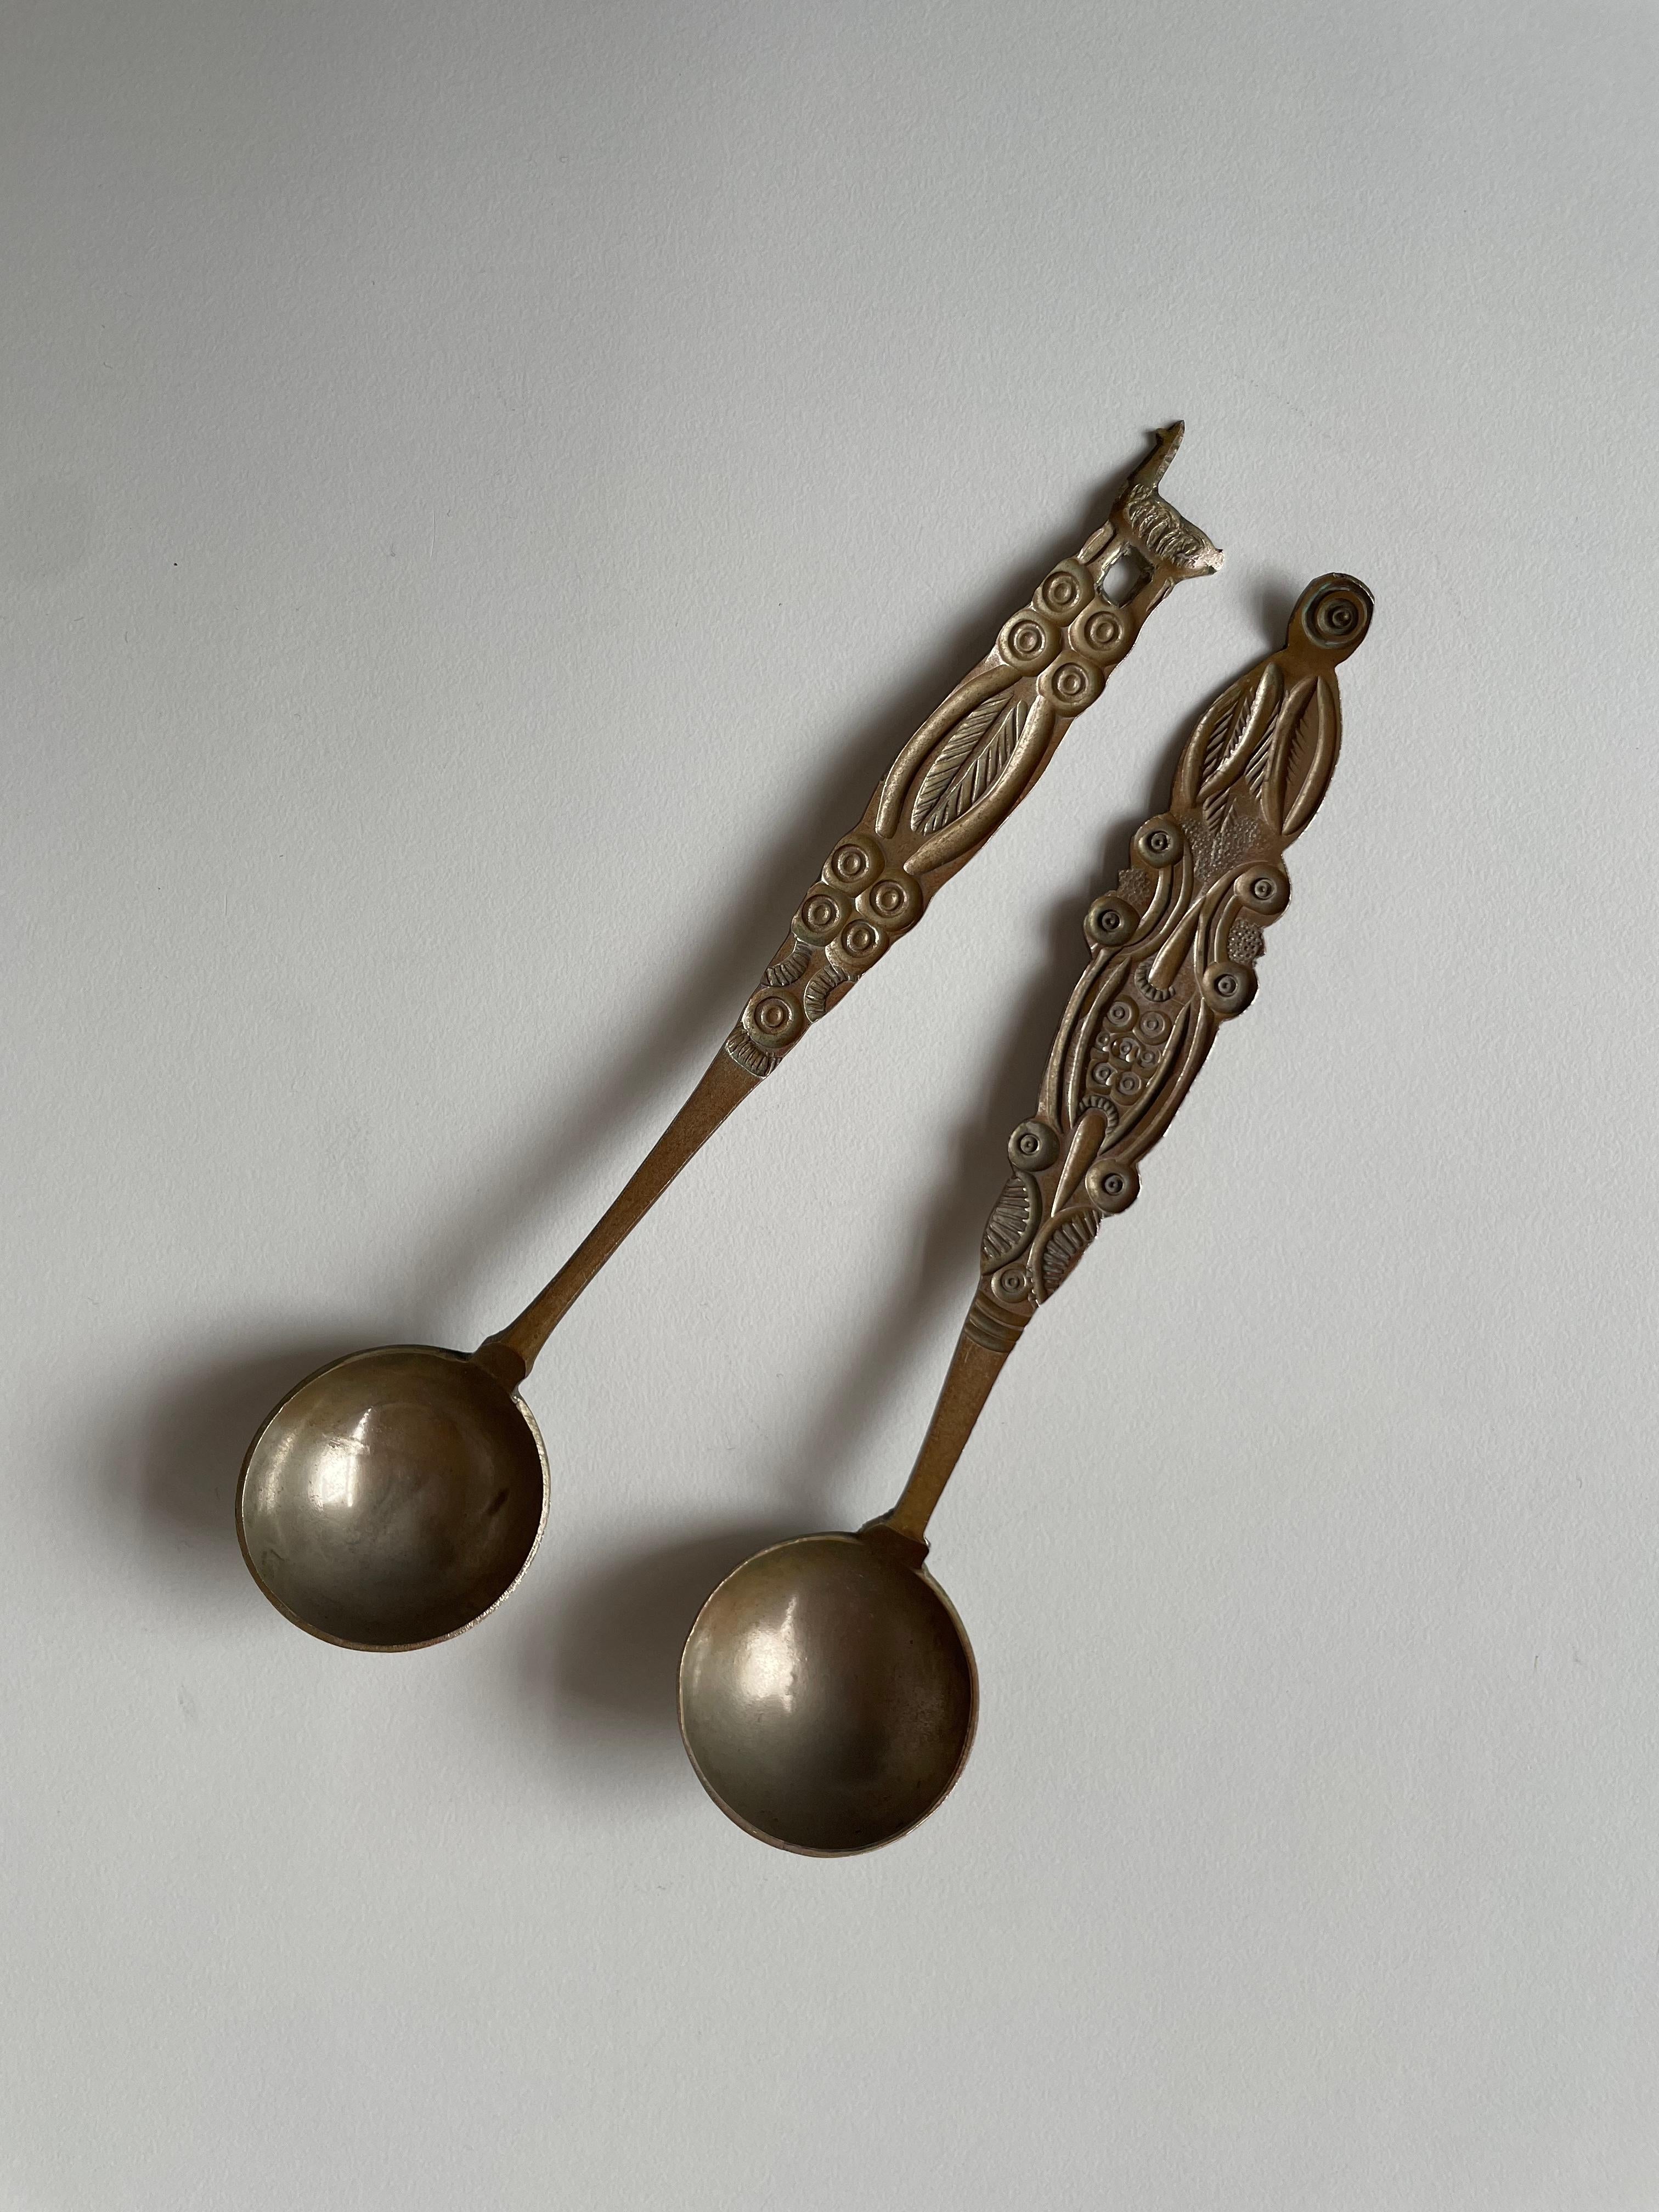 Handmade folk art vintage tea spoons. Featuring beautiful motifs inspired by the indigenous worldview and spirituality, these vintage folk art spoons embody Latin America’s rich cultural heritage.

The engraving details on the tea spoons are superb,